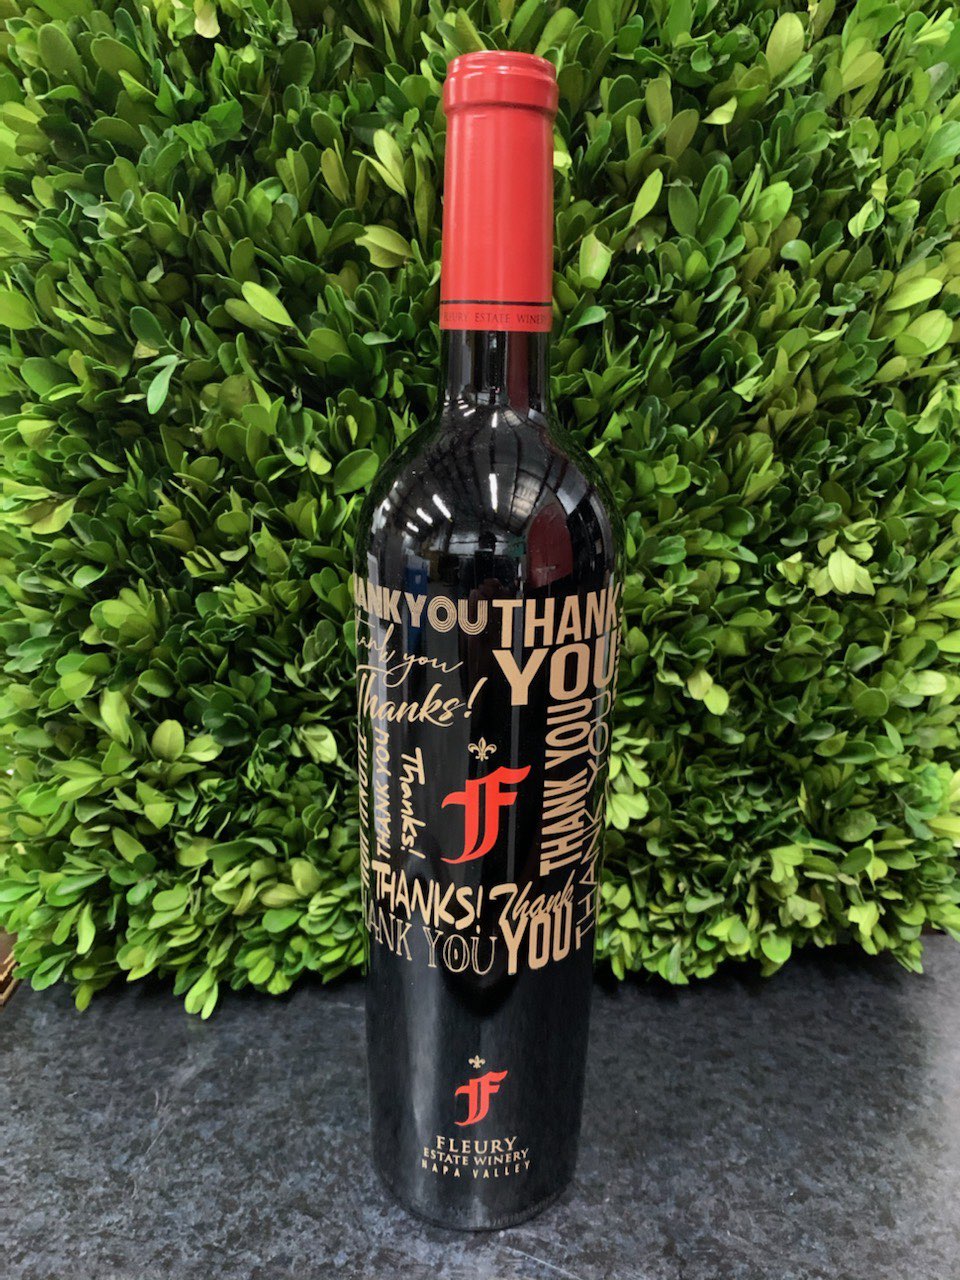 Product Image for 2019 "Thank You", Red Wine Blend